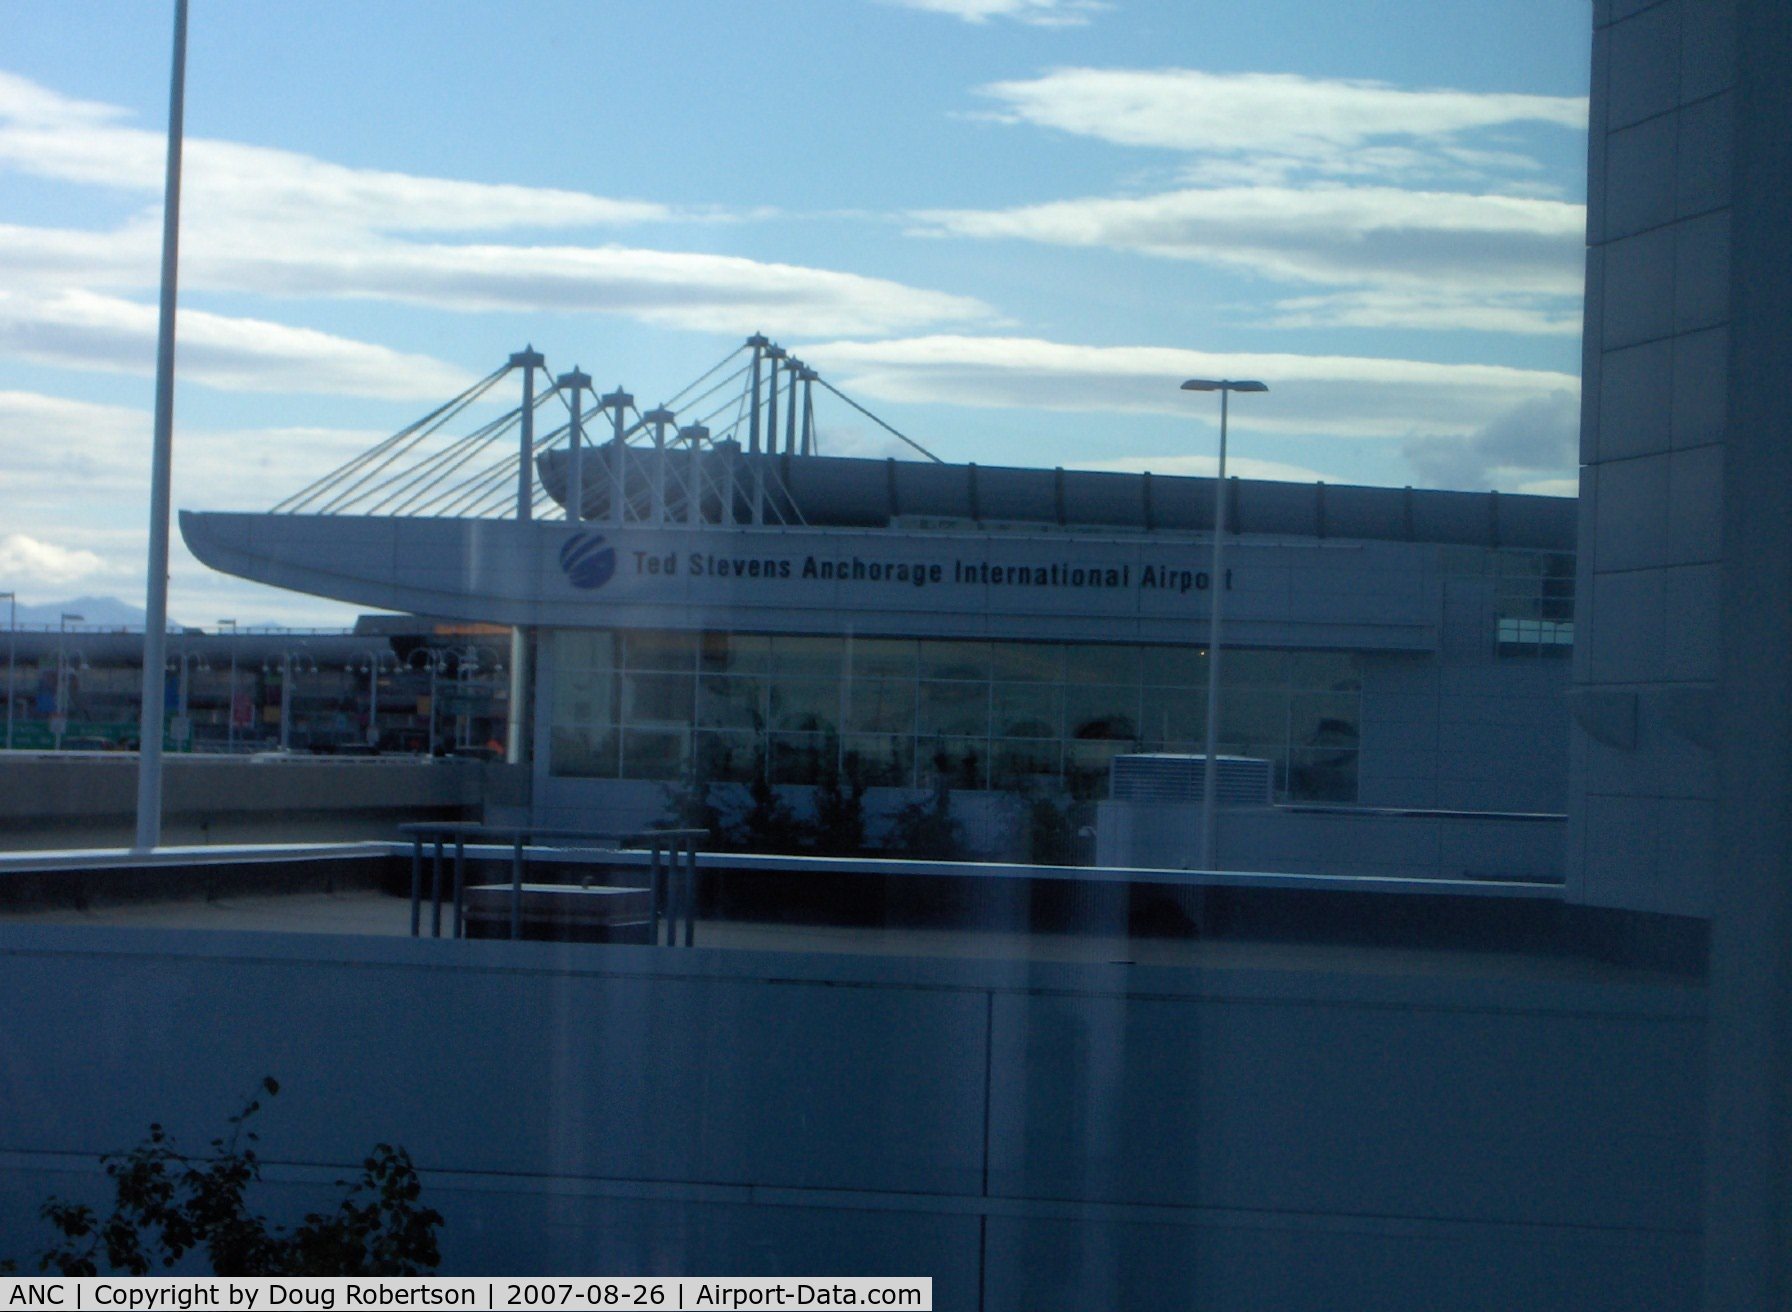 Ted Stevens Anchorage International Airport (ANC) - South Terminal, entrance, from Concourse C